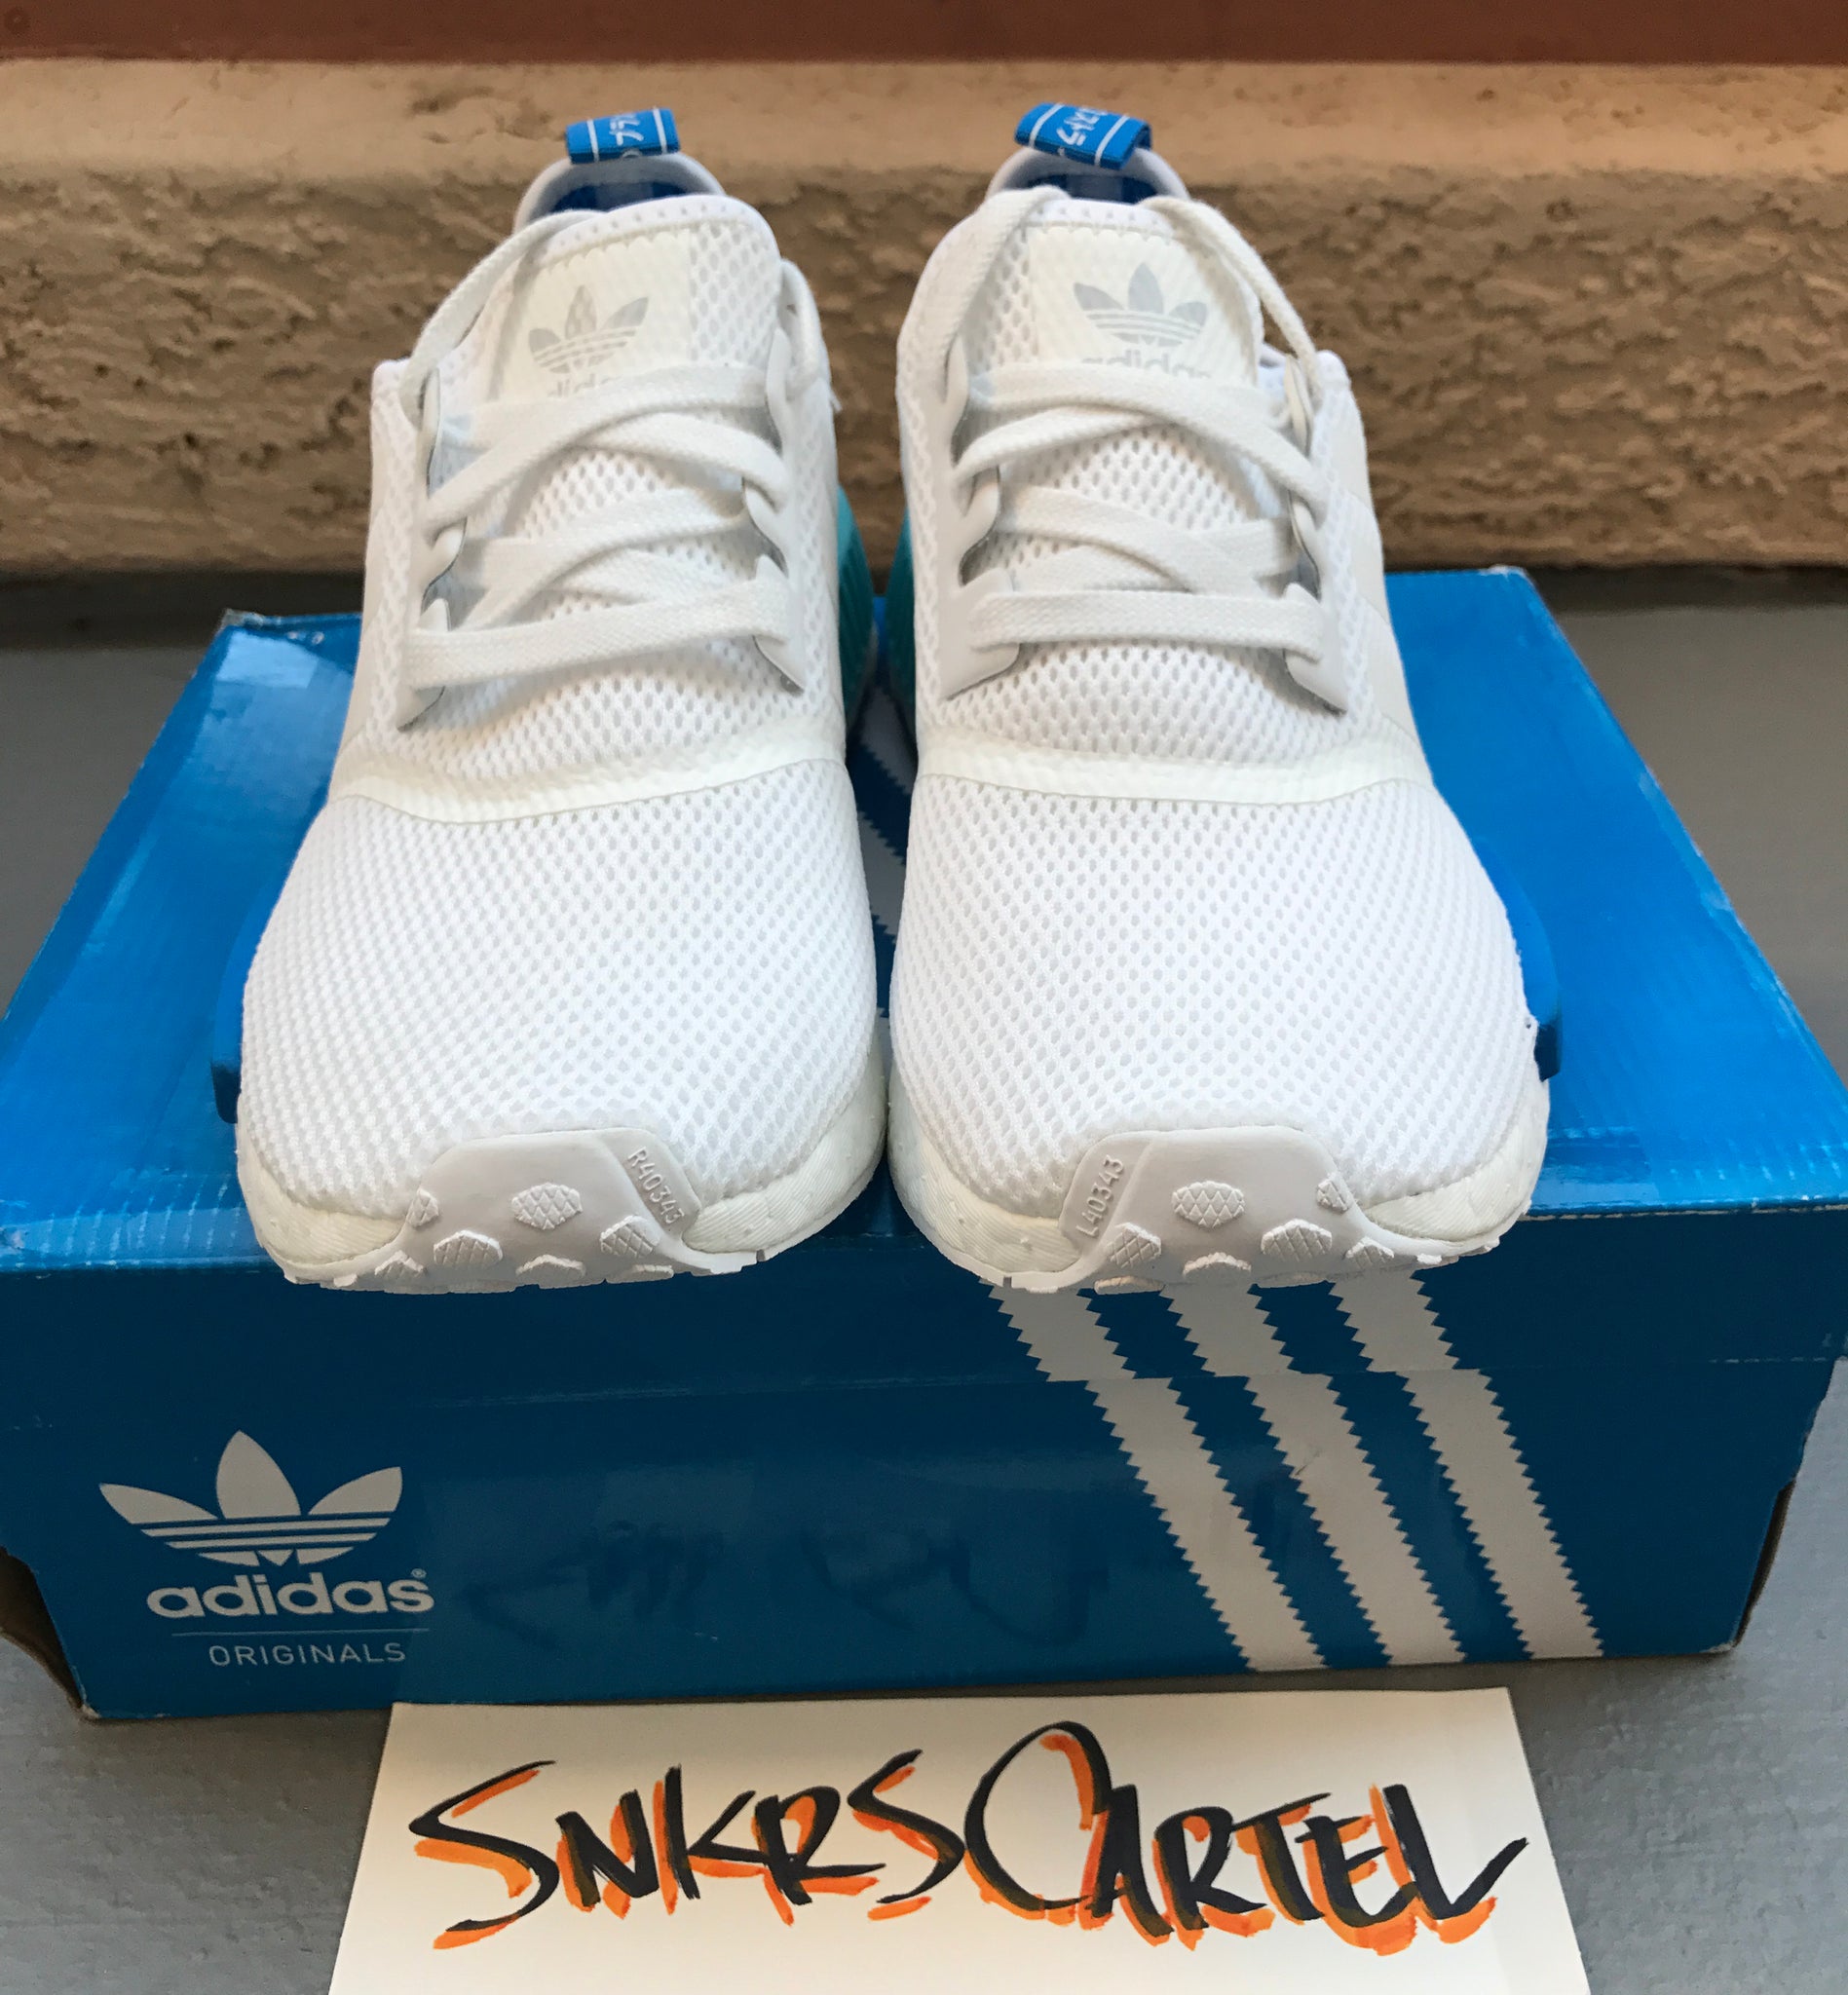 Adidas Womens NMD R1 White Blue Glow S75235 – Snkrs Cartel